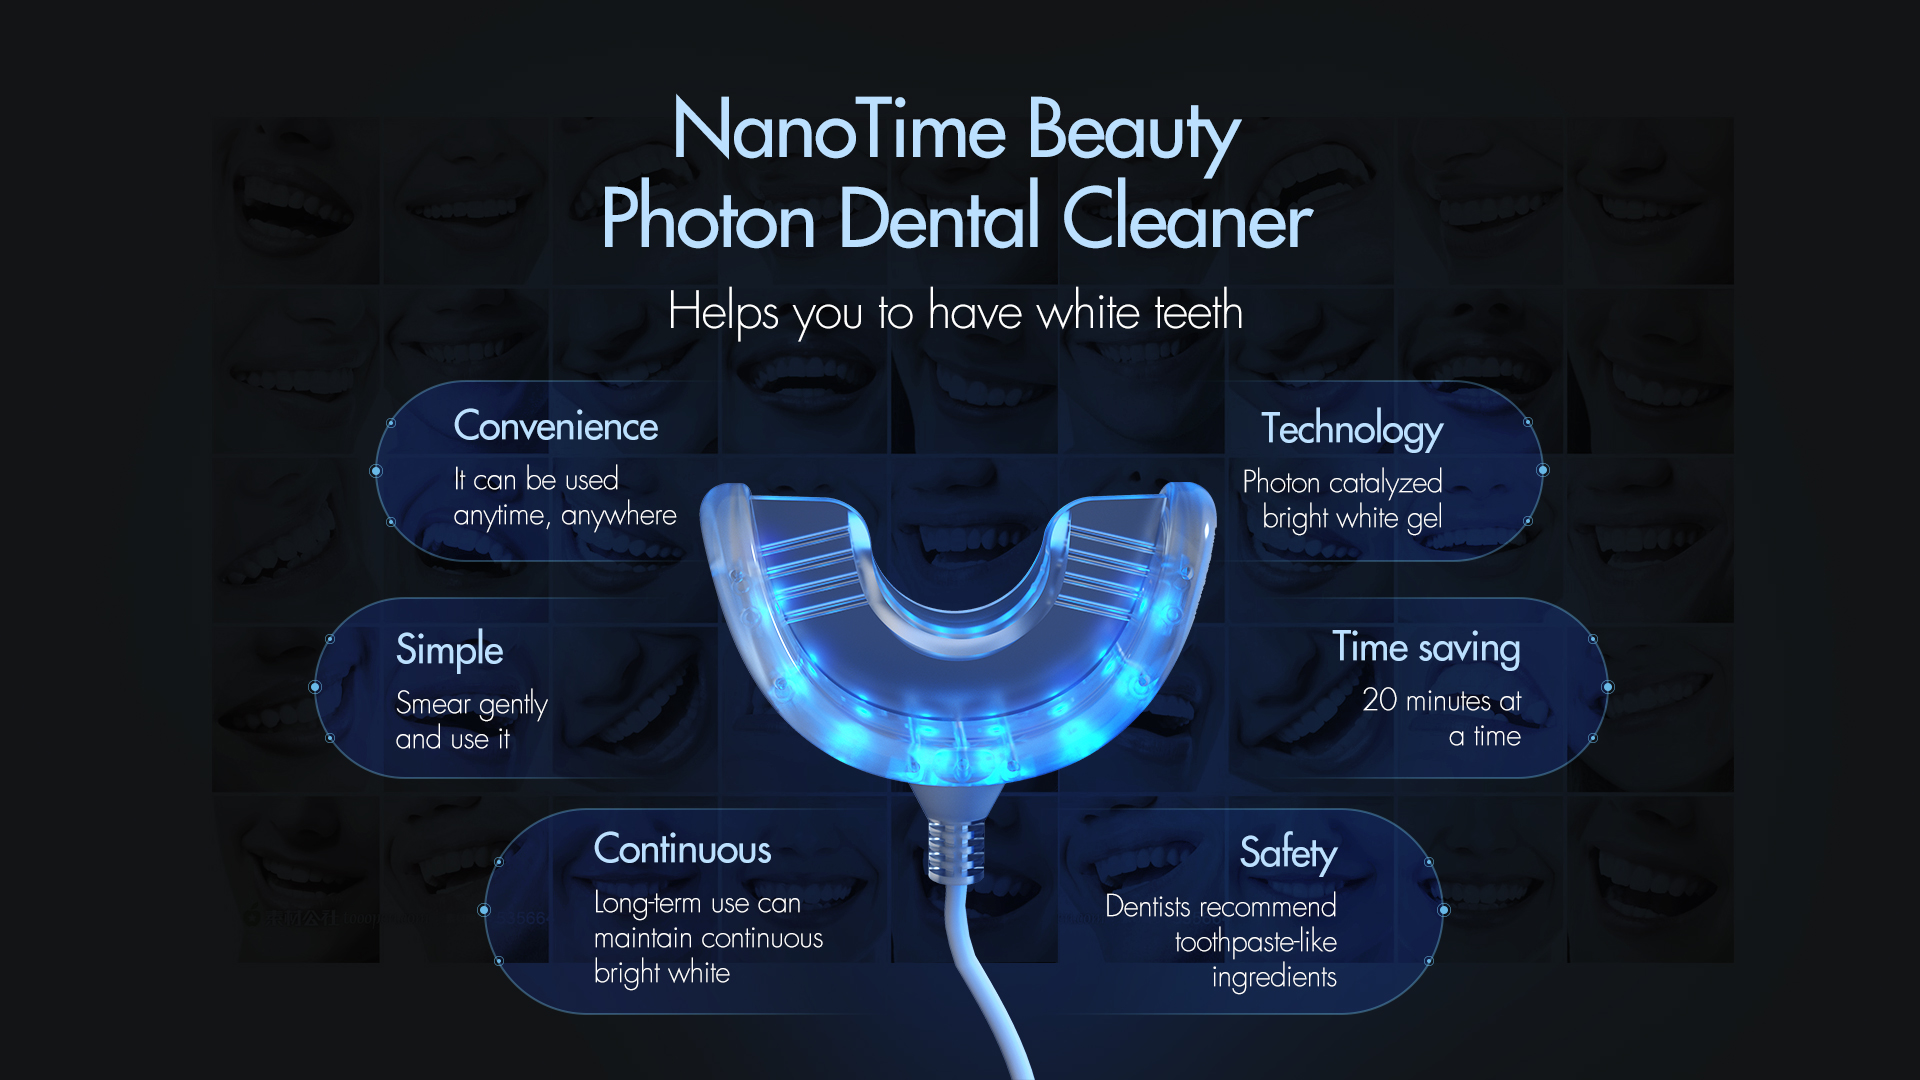 ITO1 Photon Dental cleaner